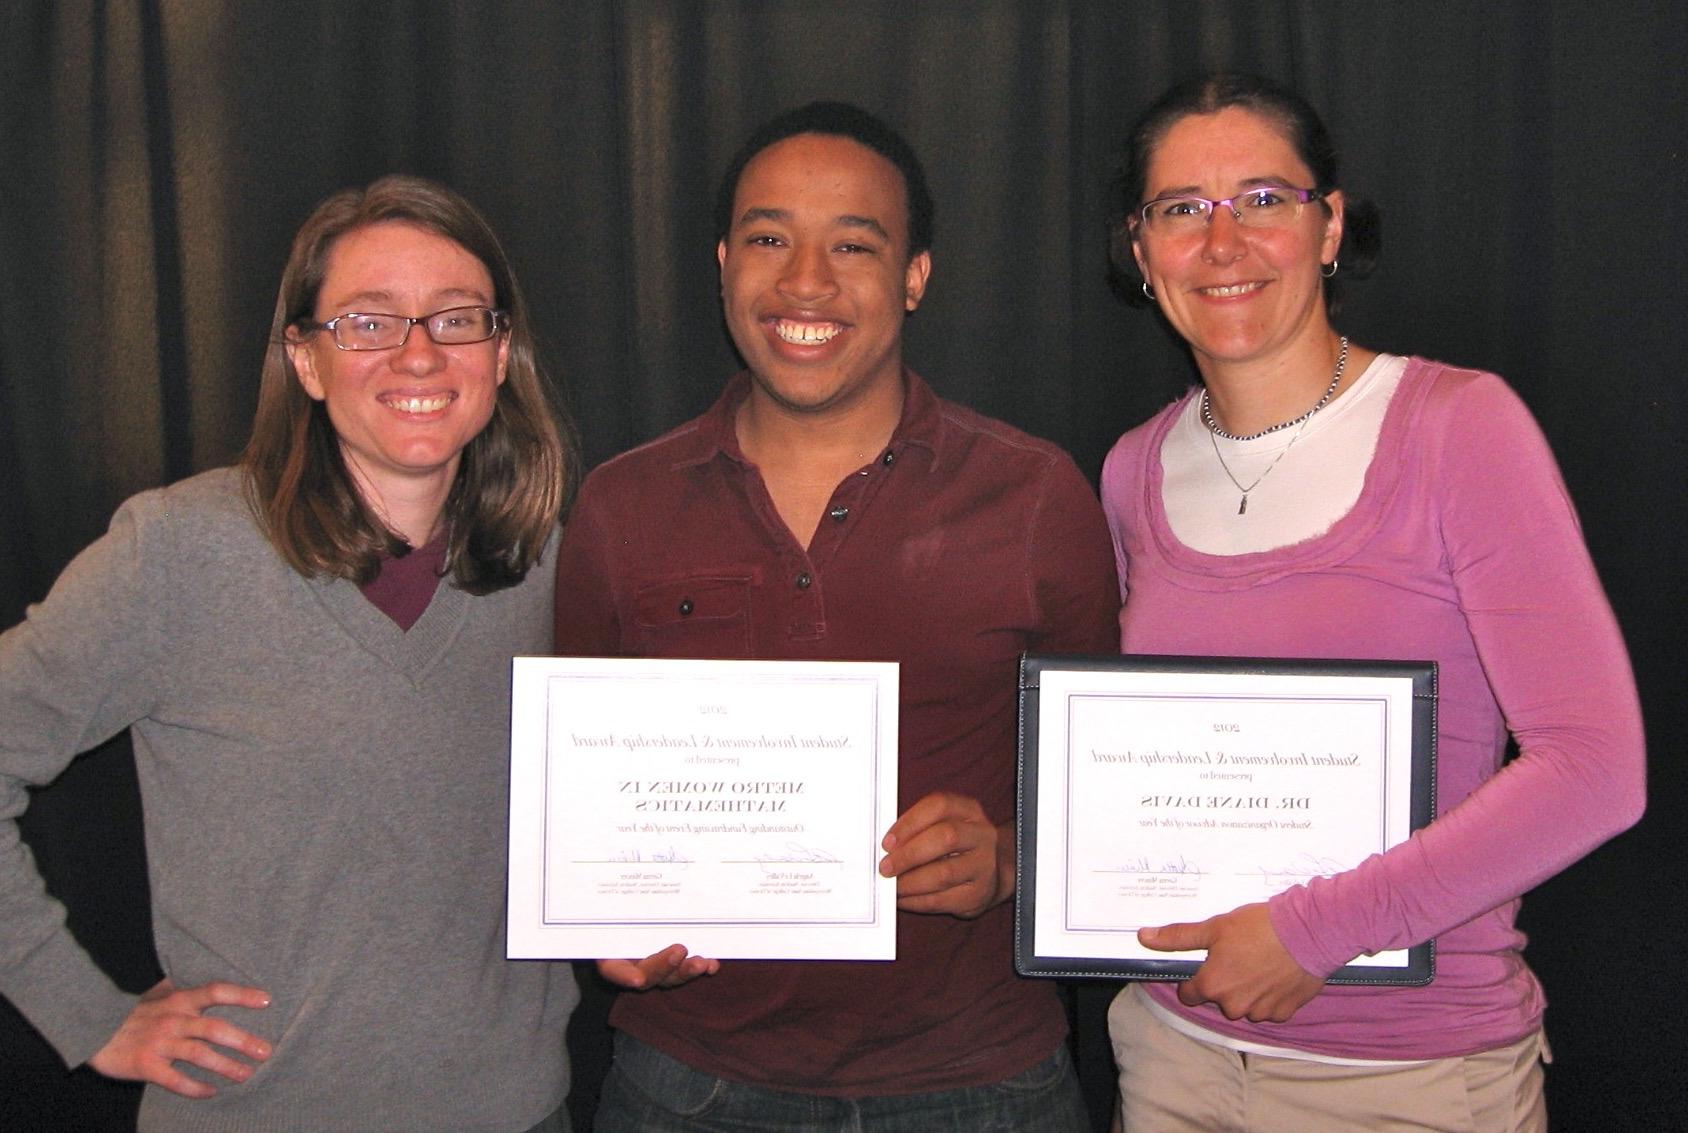 Three people standing and holding certificates